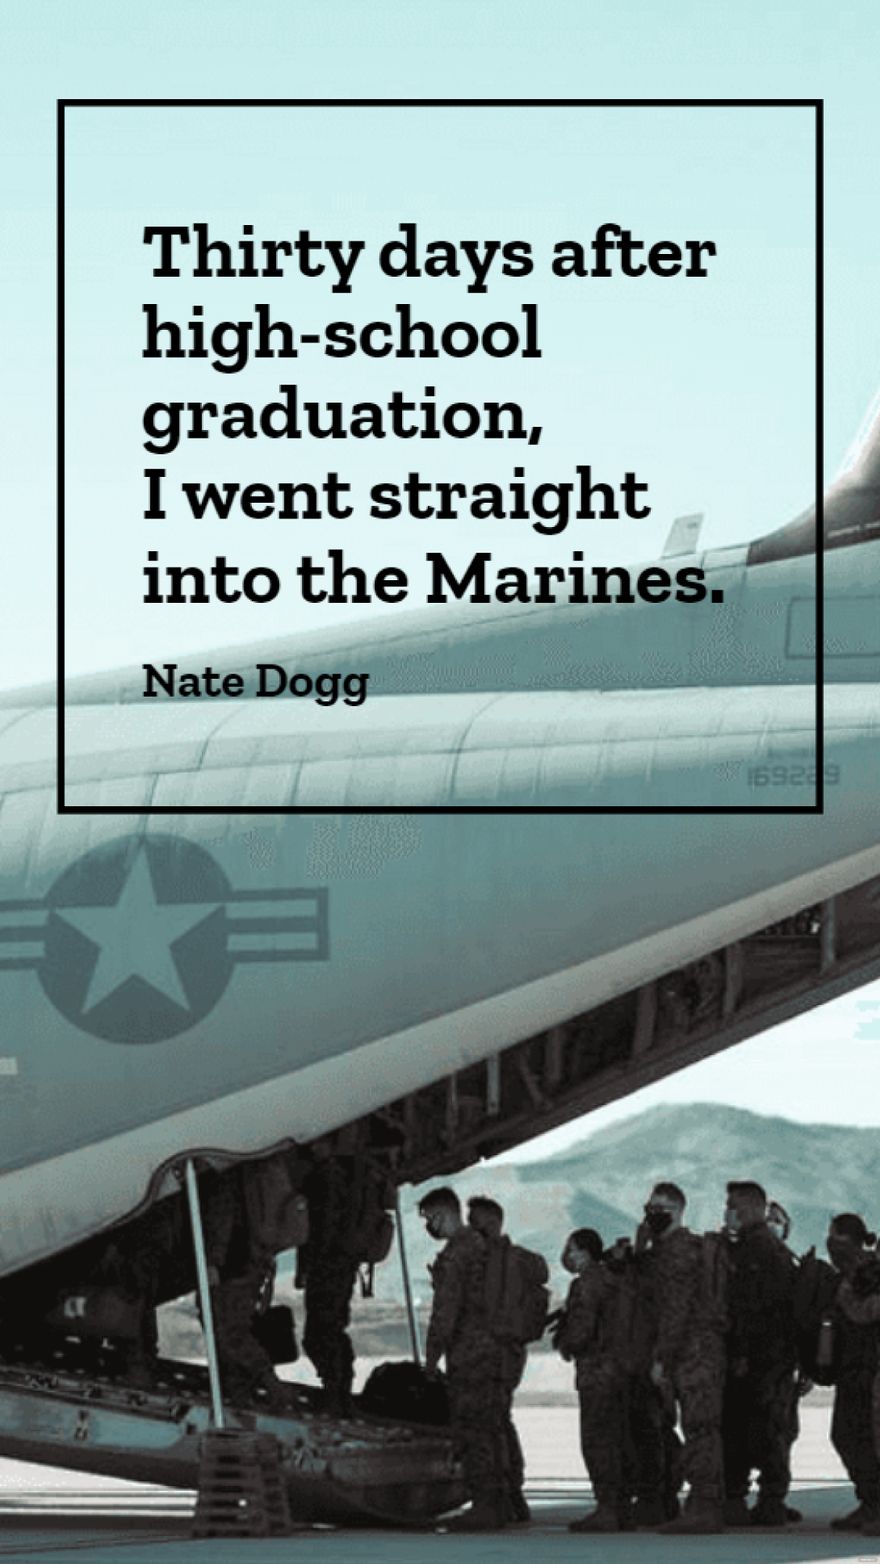 Free Nate Dogg - Thirty days after high-school graduation, I went straight into the Marines. in JPG